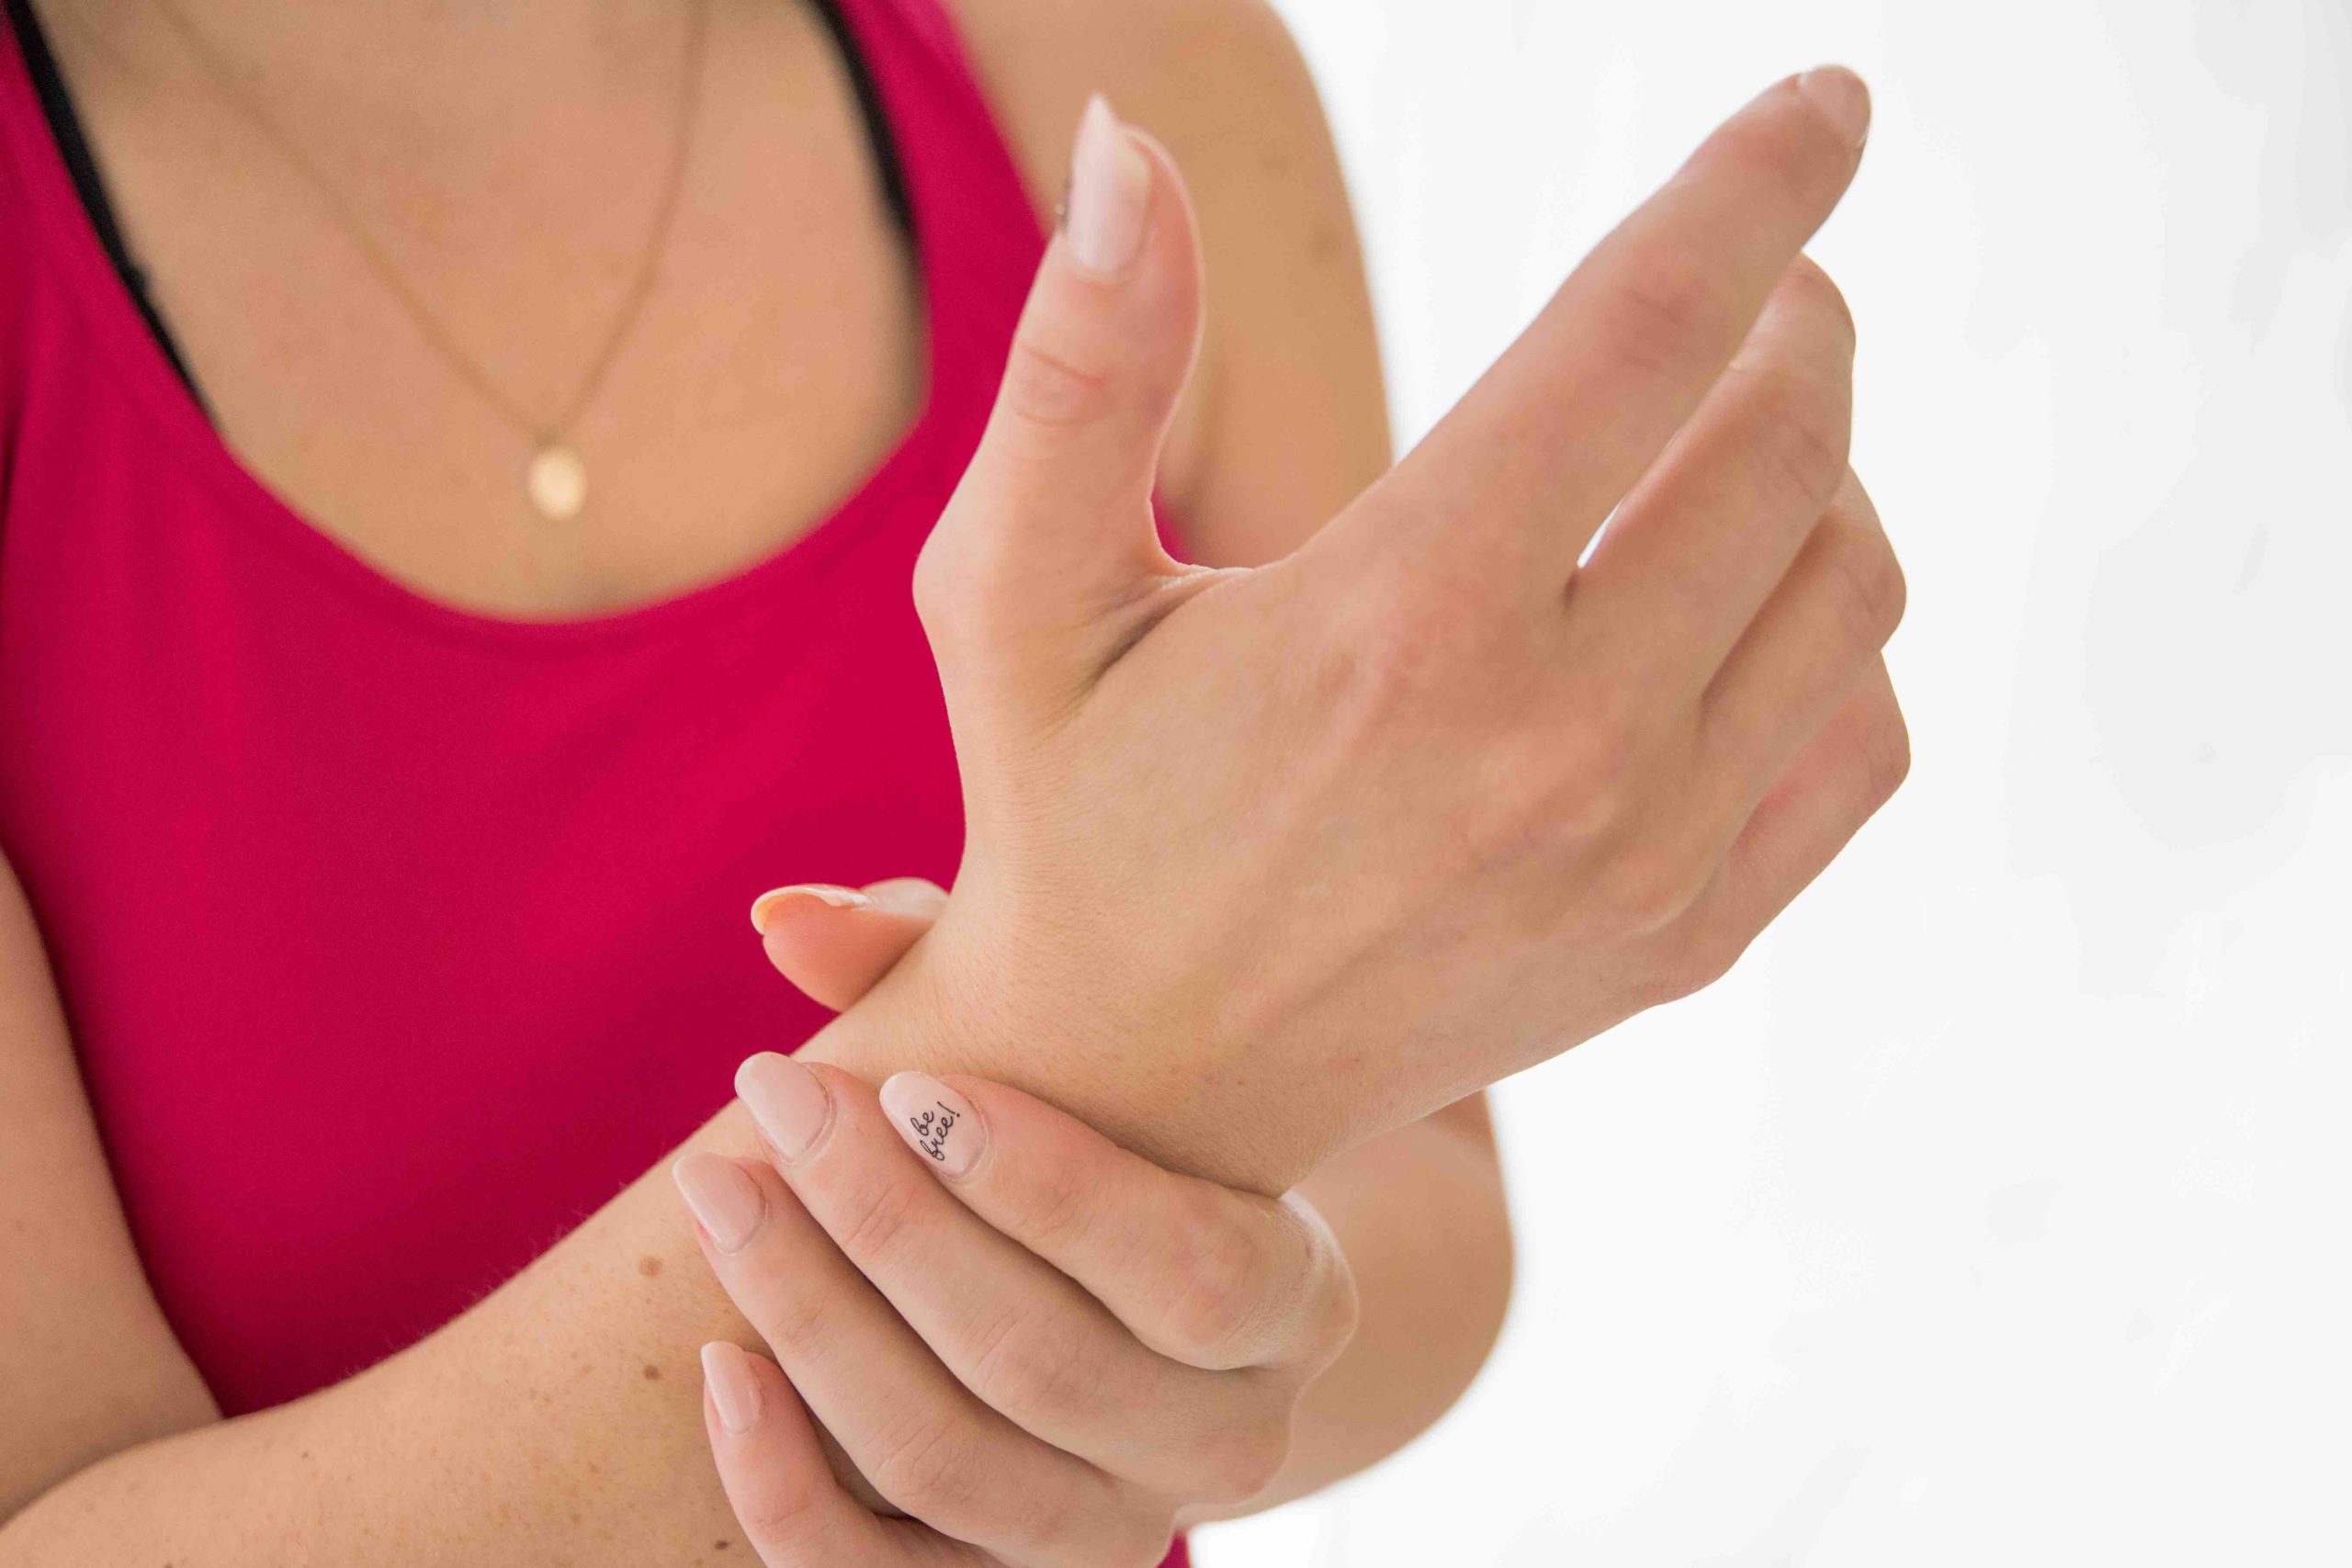 HOW TO AVOID WRIST PAIN IN YOGA